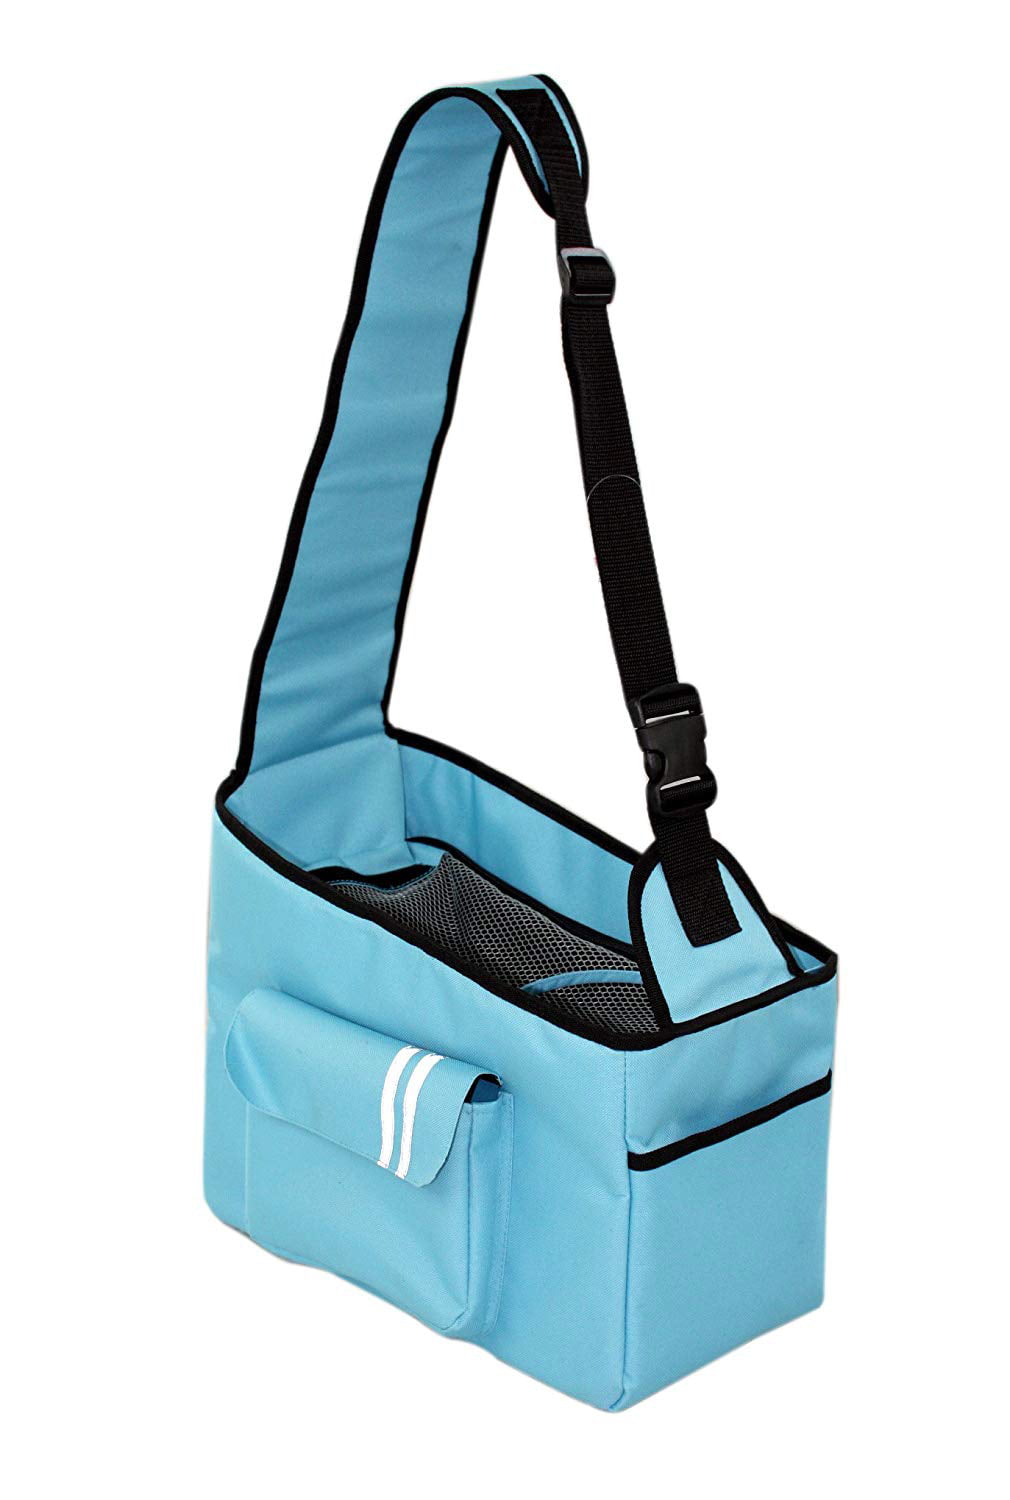 Fashion Back-Supportive Over-The-Shoulder Fashion Pet Carrier 